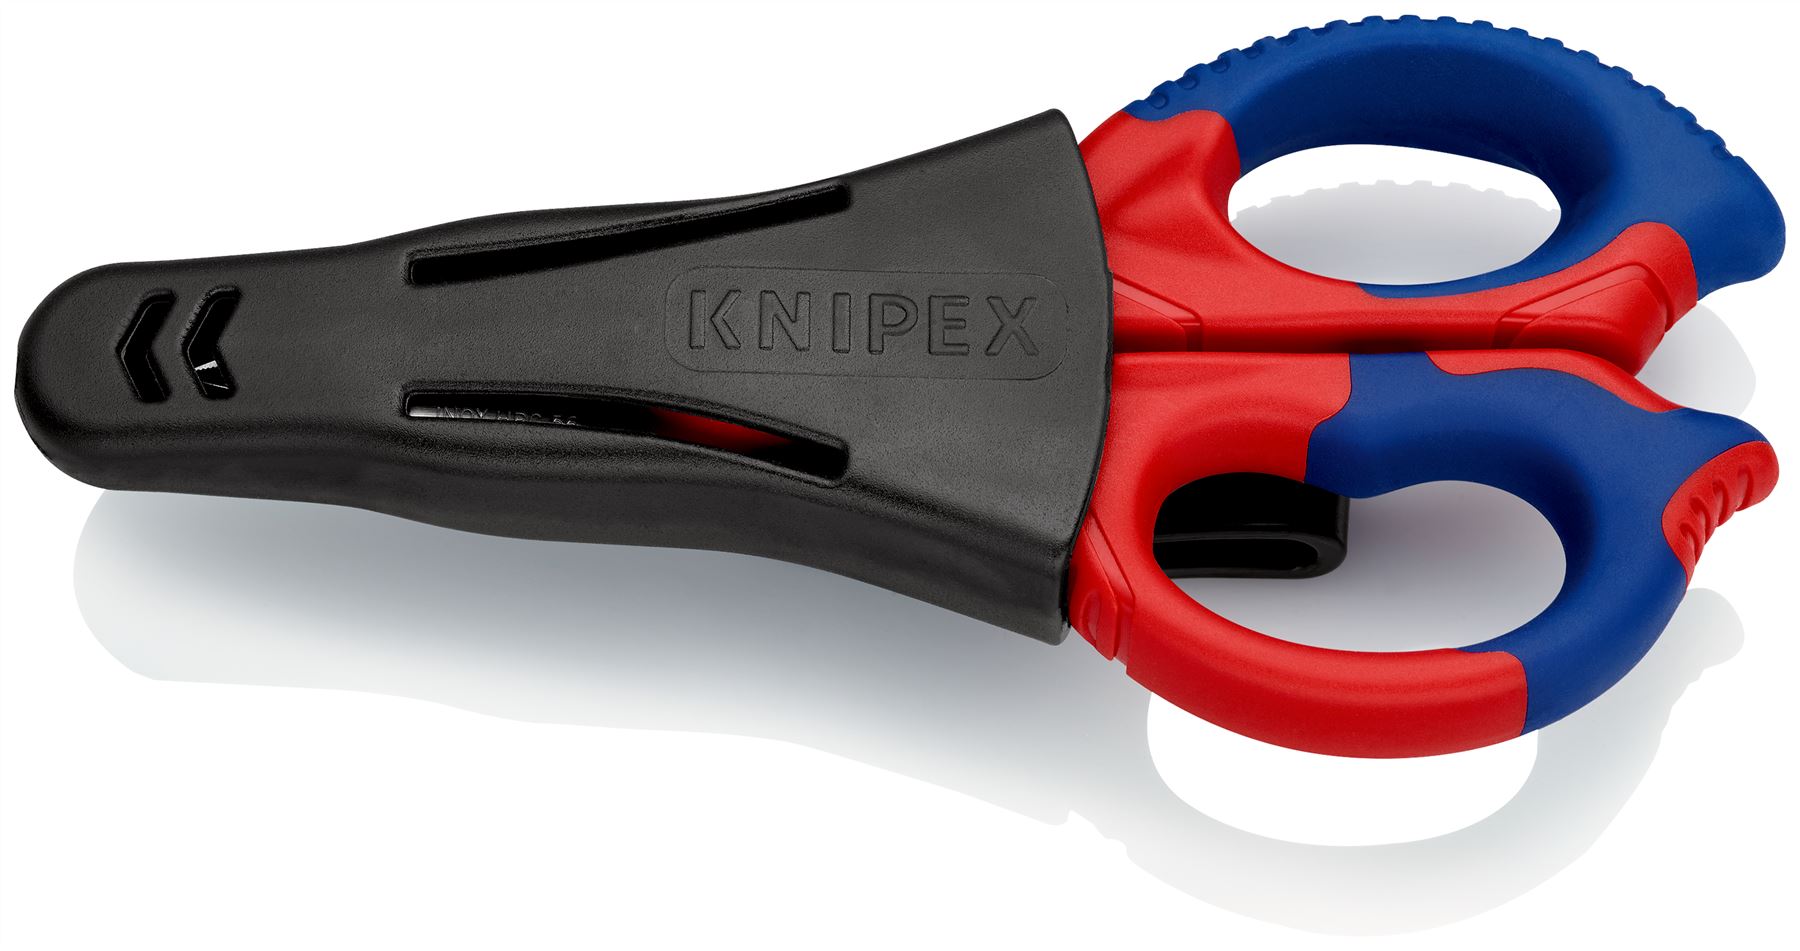 KNIPEX Electricians Shears Scissors with Plastic Belt Pouch 155mm Multi Component Grips 95 05 155 SB